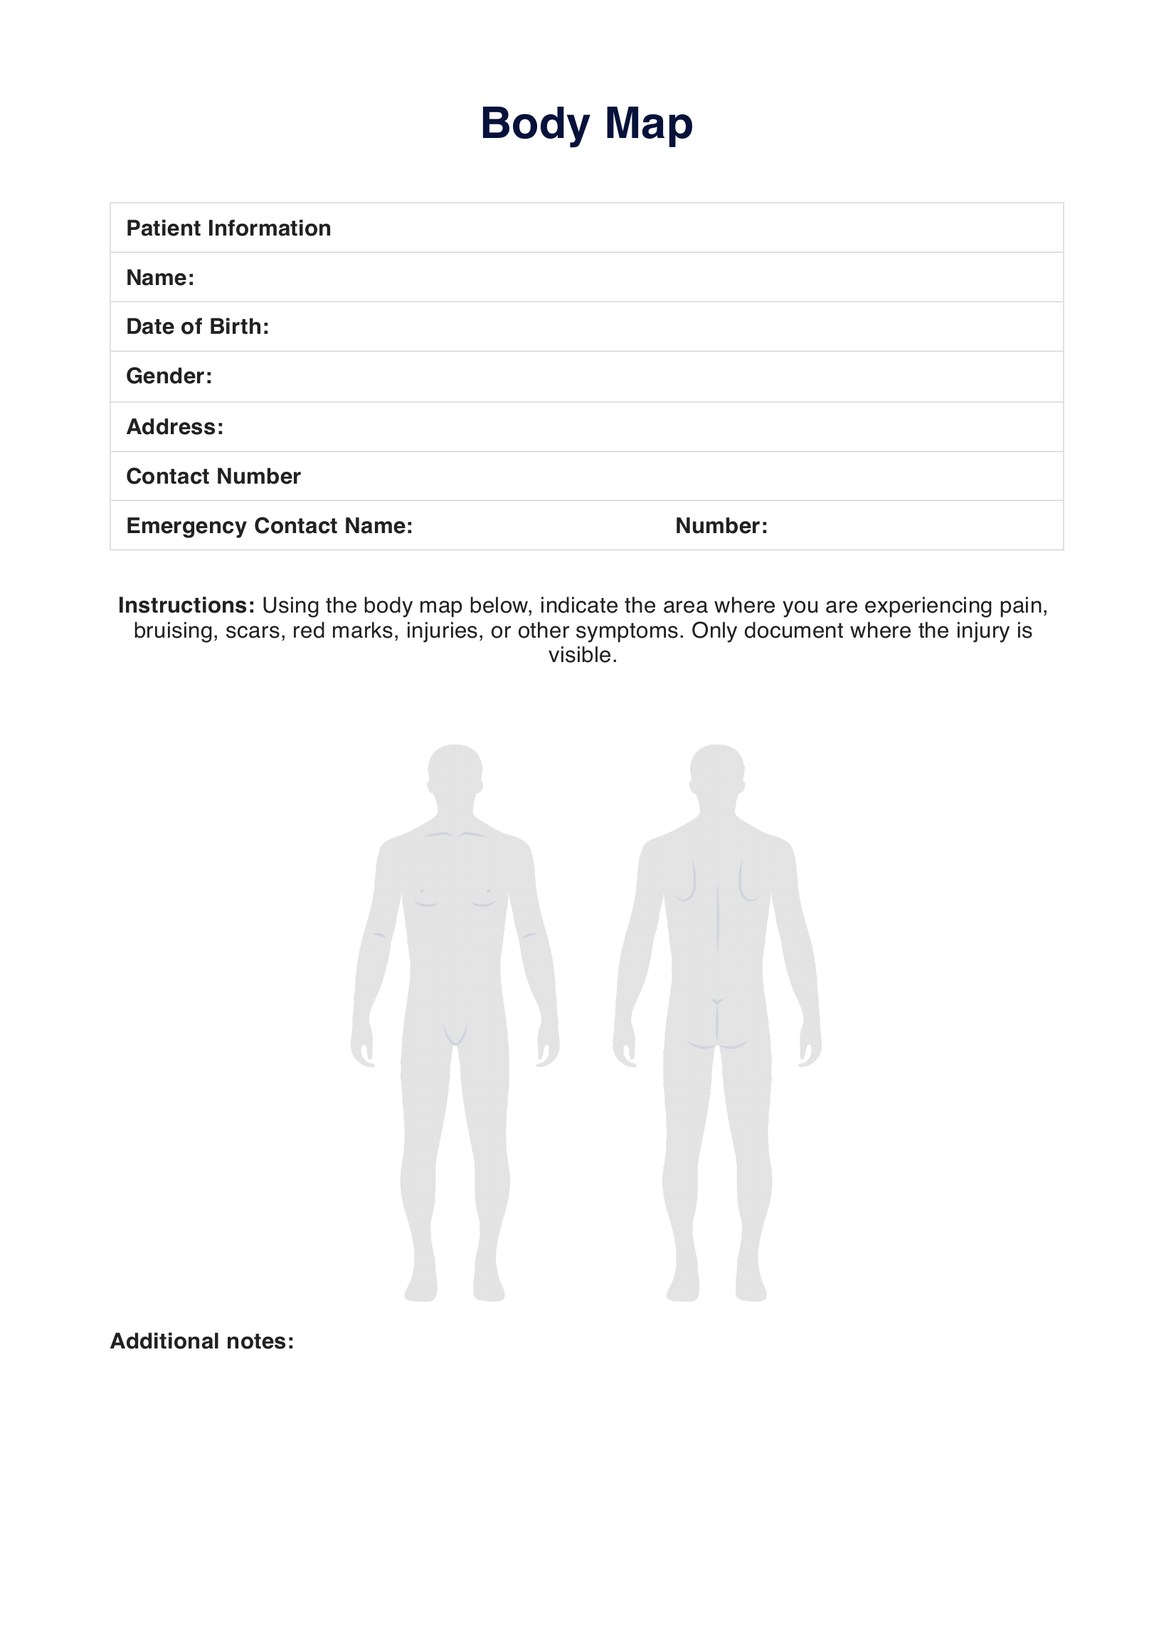 Body Map Template PDF Example